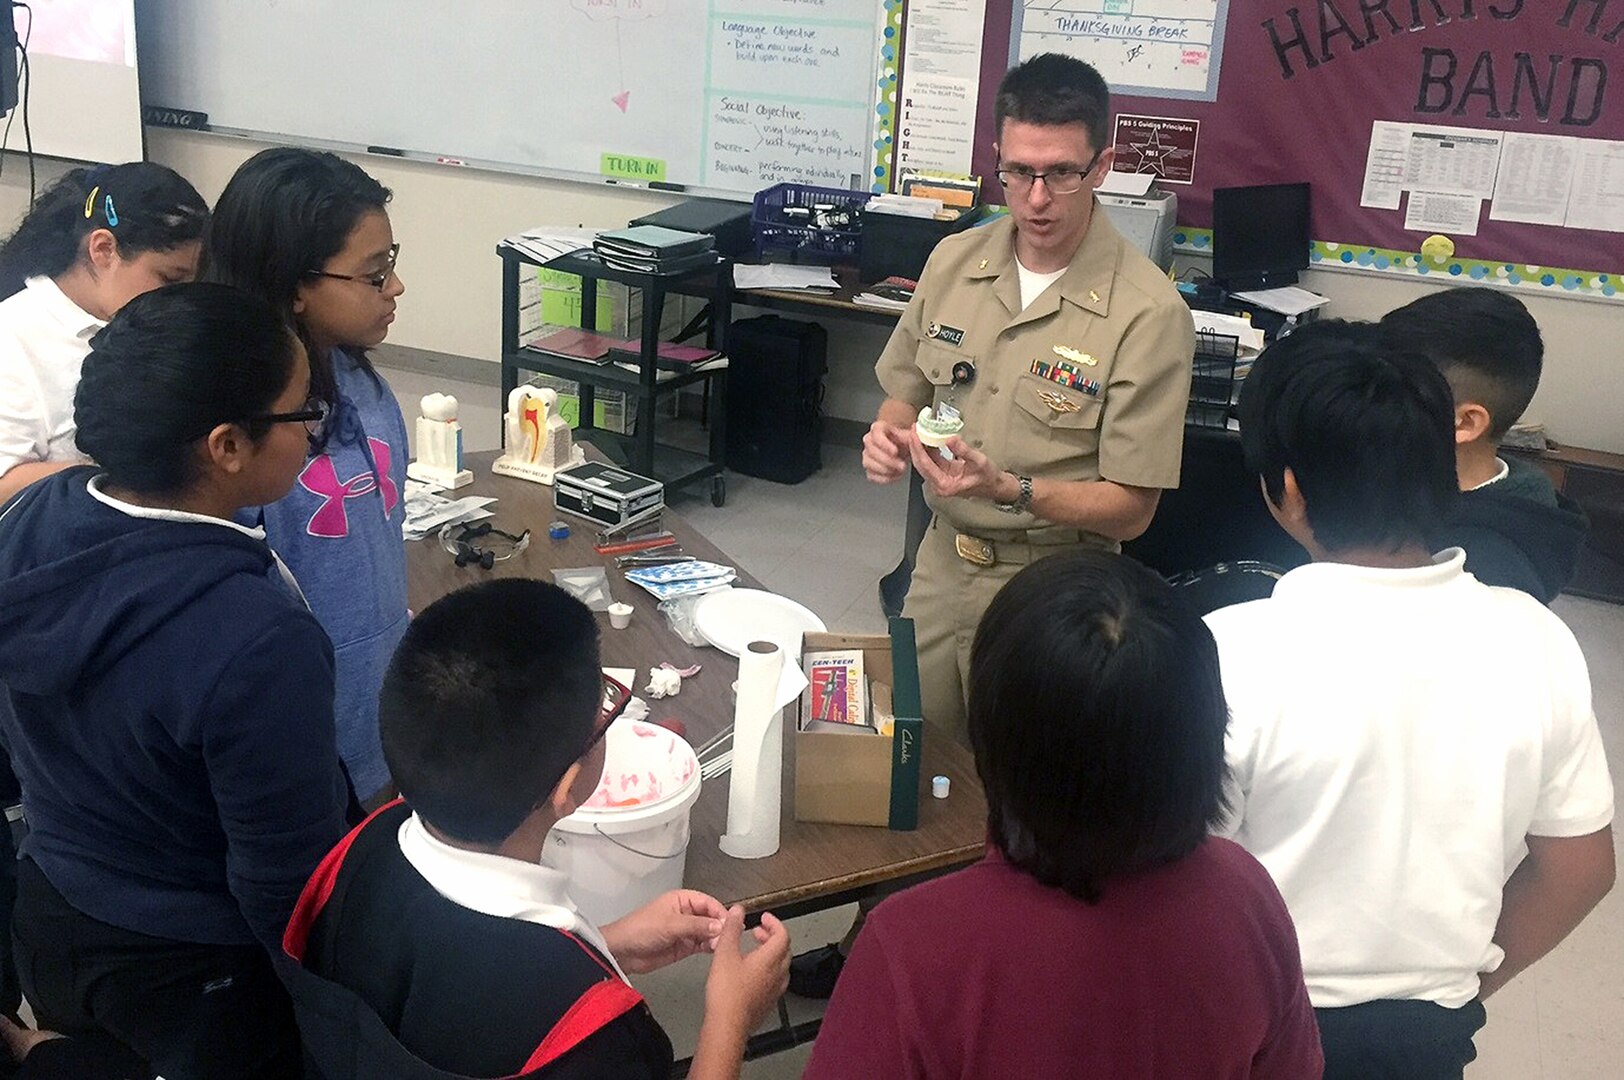 Lt. Cmdr. Jeffery Hoyle, a research dentist with the Naval Medical Research Unit San Antonio at Joint Base San Antonio-Fort Sam Houston, demonstrates the casting of a dental mold with silicone pressure material during his presentation at the Joel C. Harris Academy Middle School Career Day in San Antonio Nov. 16, 2016.